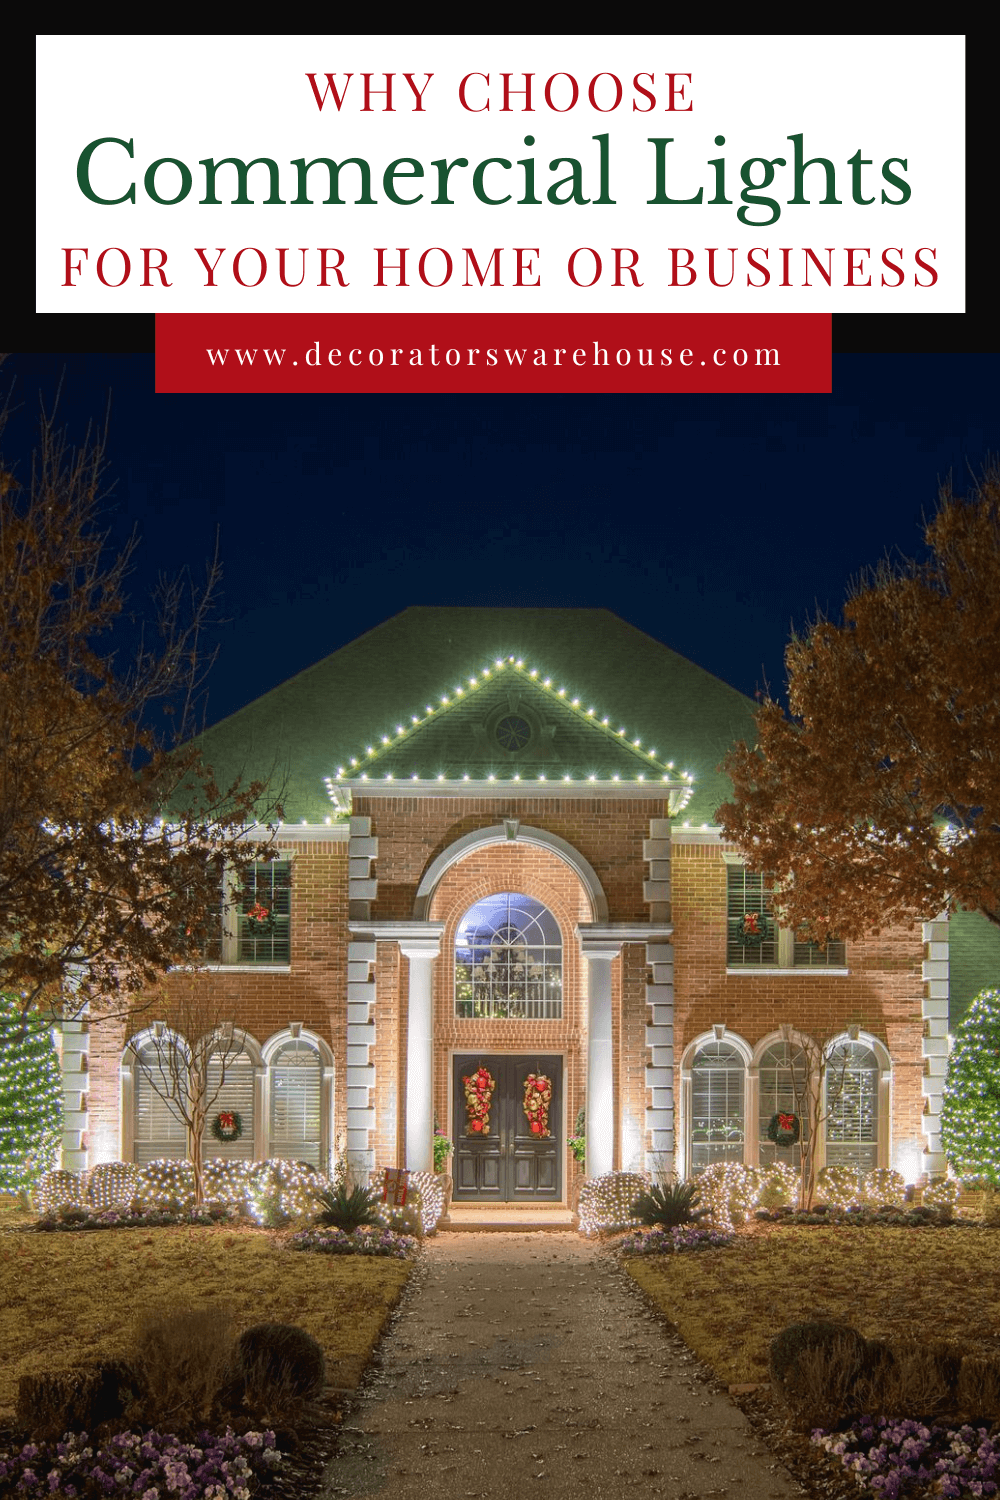 Why Choose Commercial Lights for Your Home